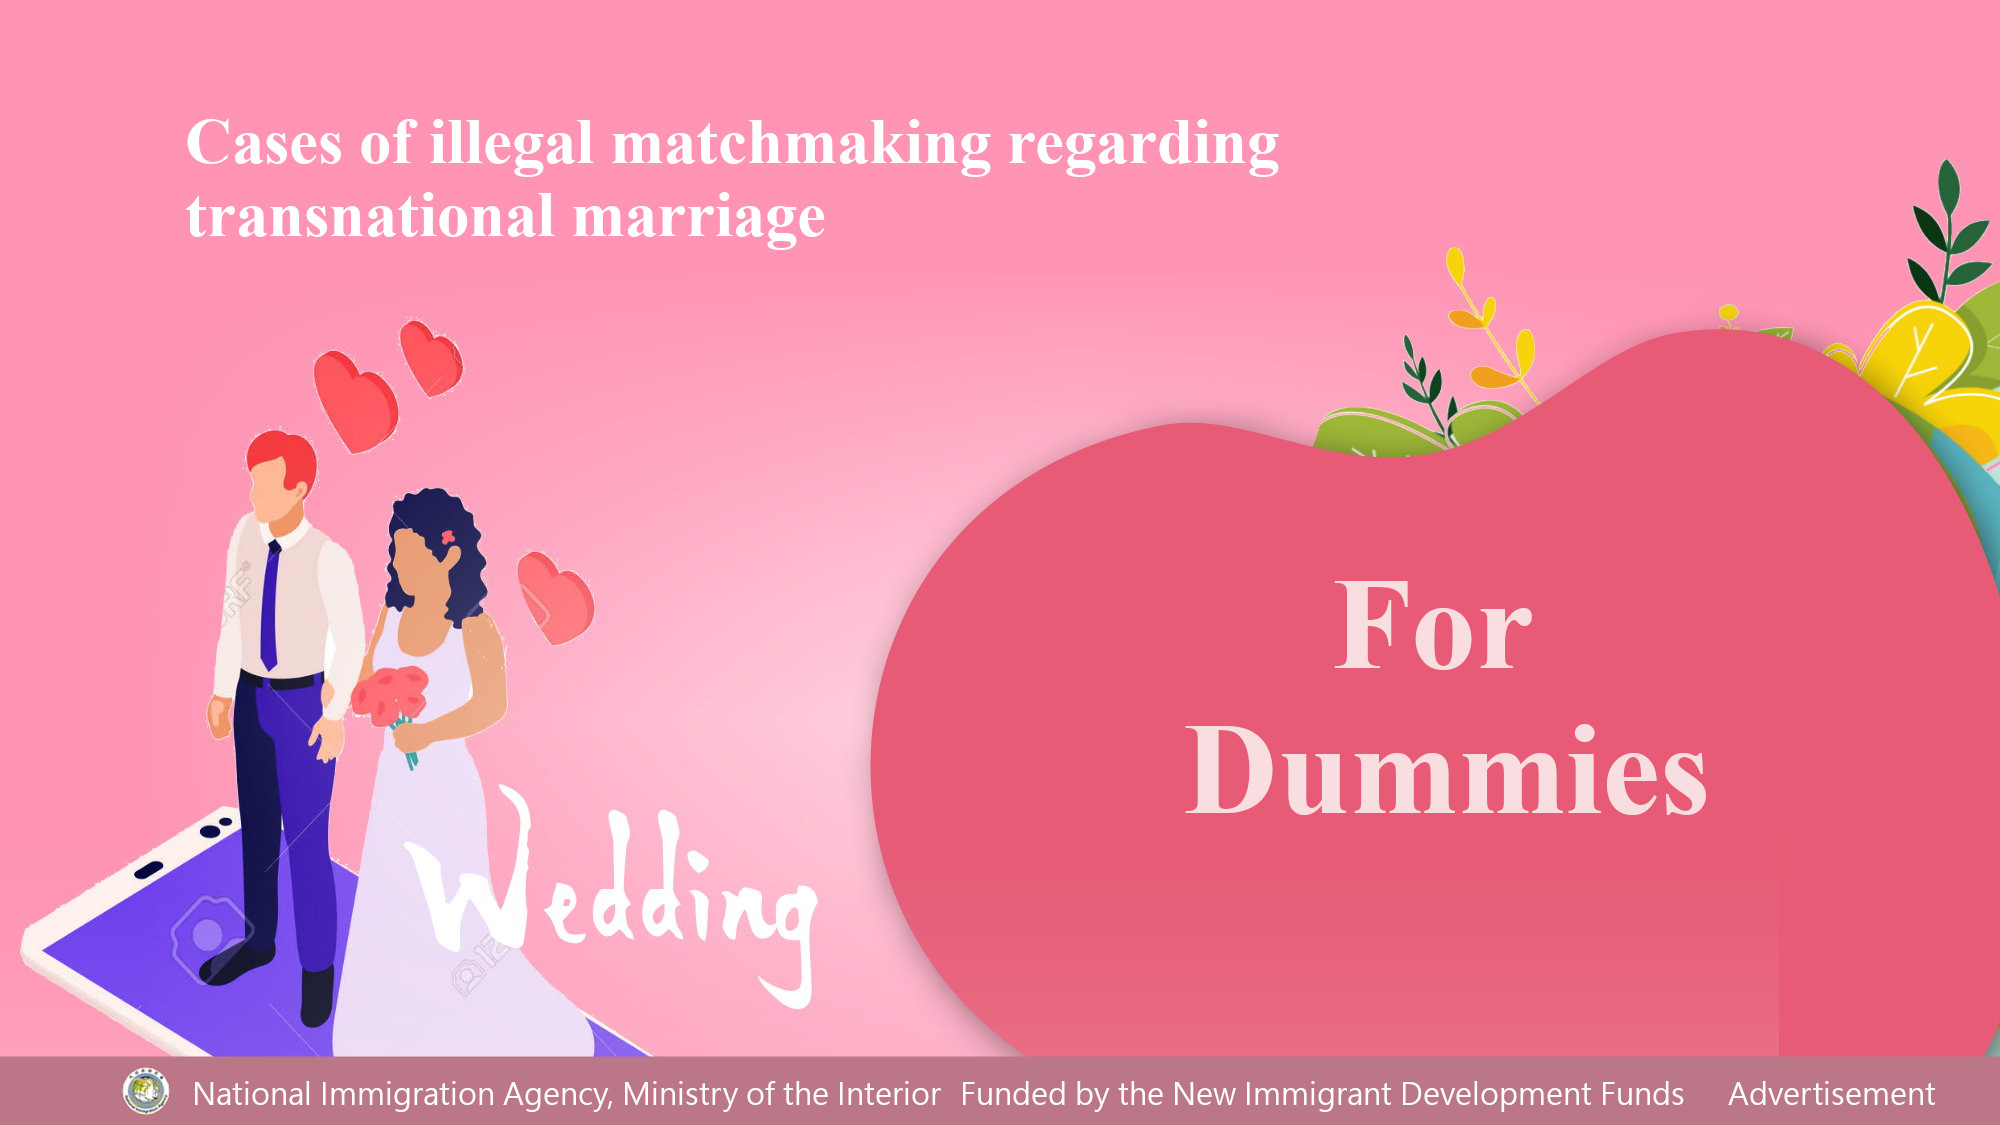 Cases of illegal matchmaking regarding transnational marriage